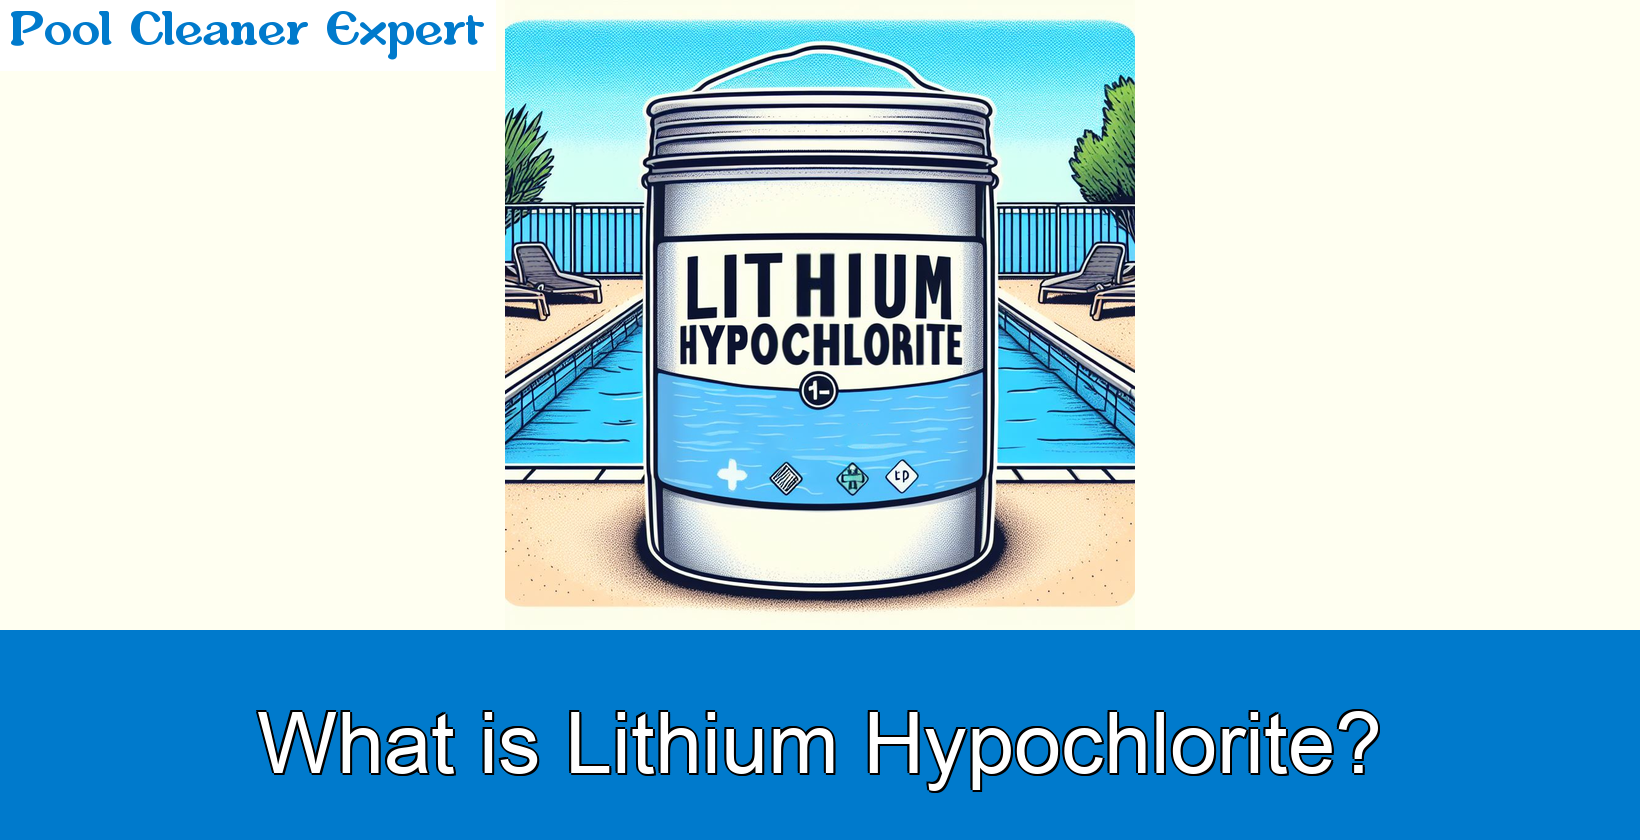 Lithium Hypochlorite in Pools: All You Need to Know